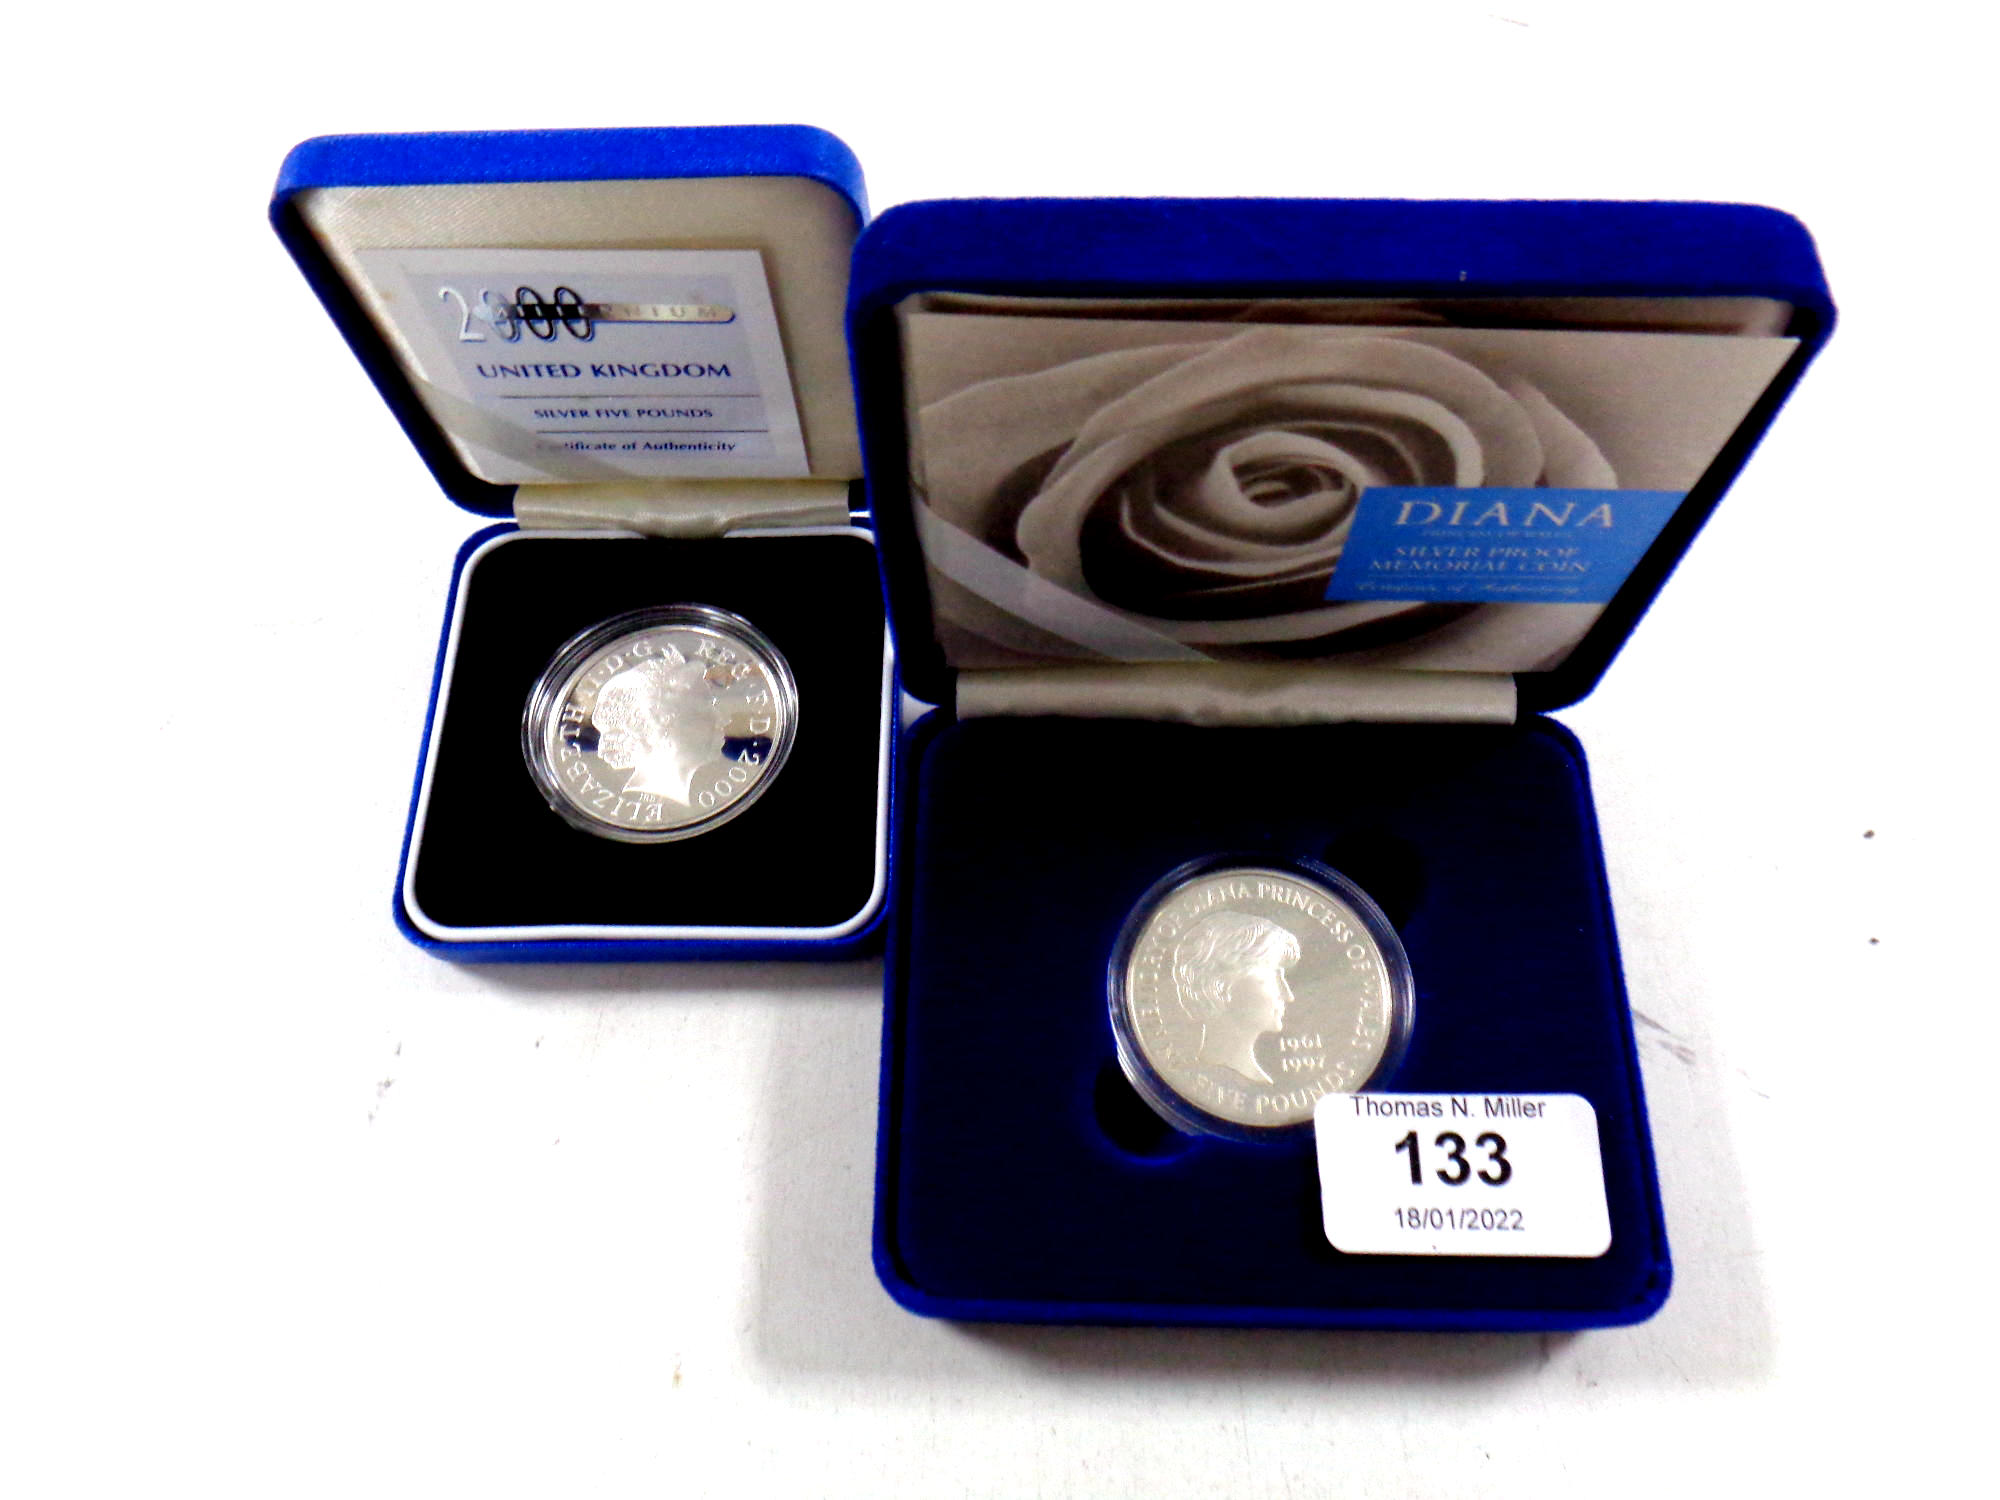 Two Royal Mint silver proof five pound coins, 2000 Millennium and Diana Princess of Wales,